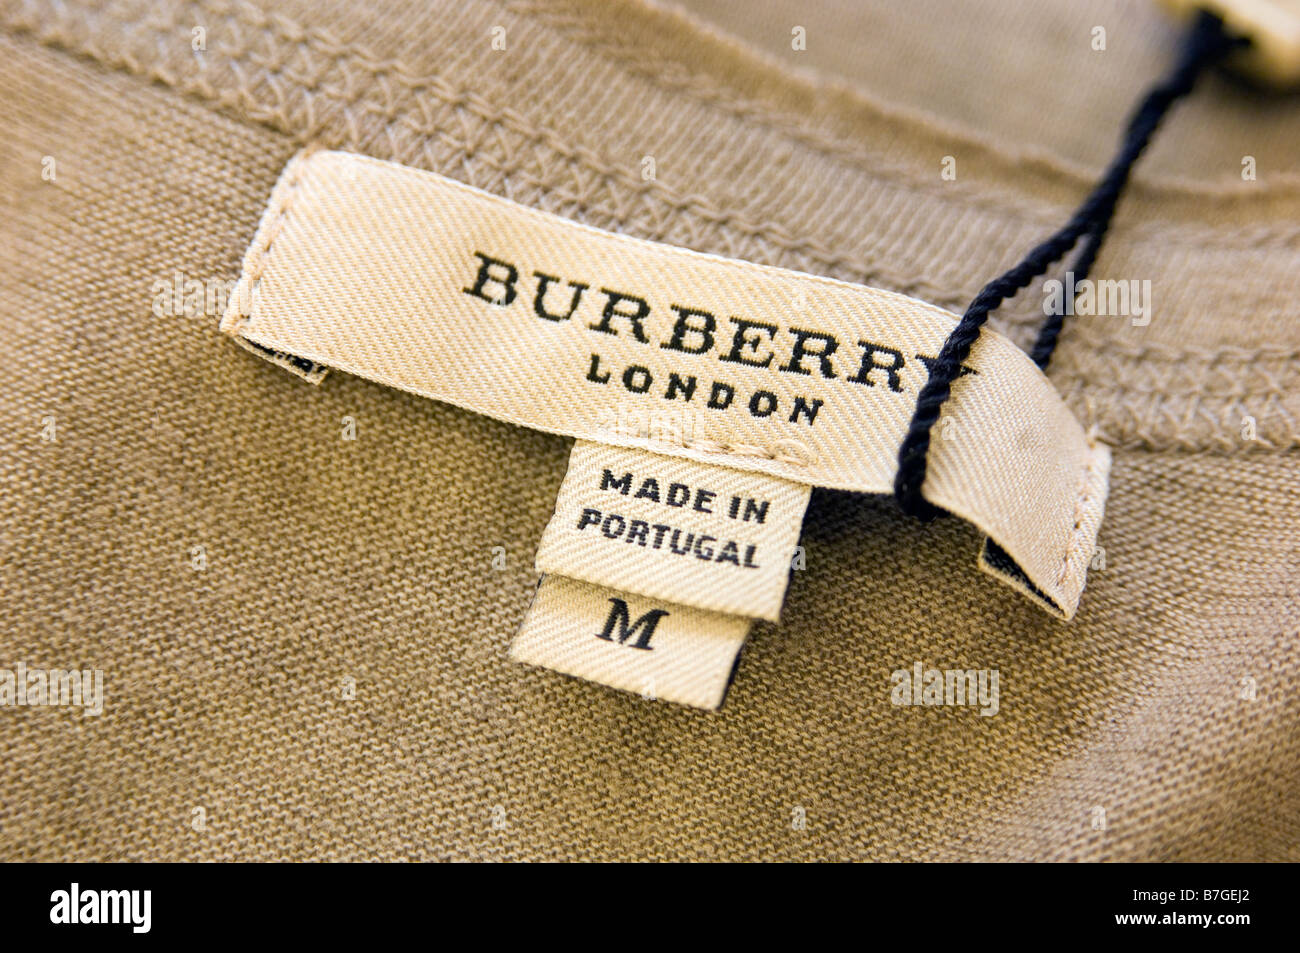 Burberry shirt hi-res stock photography and images - Alamy